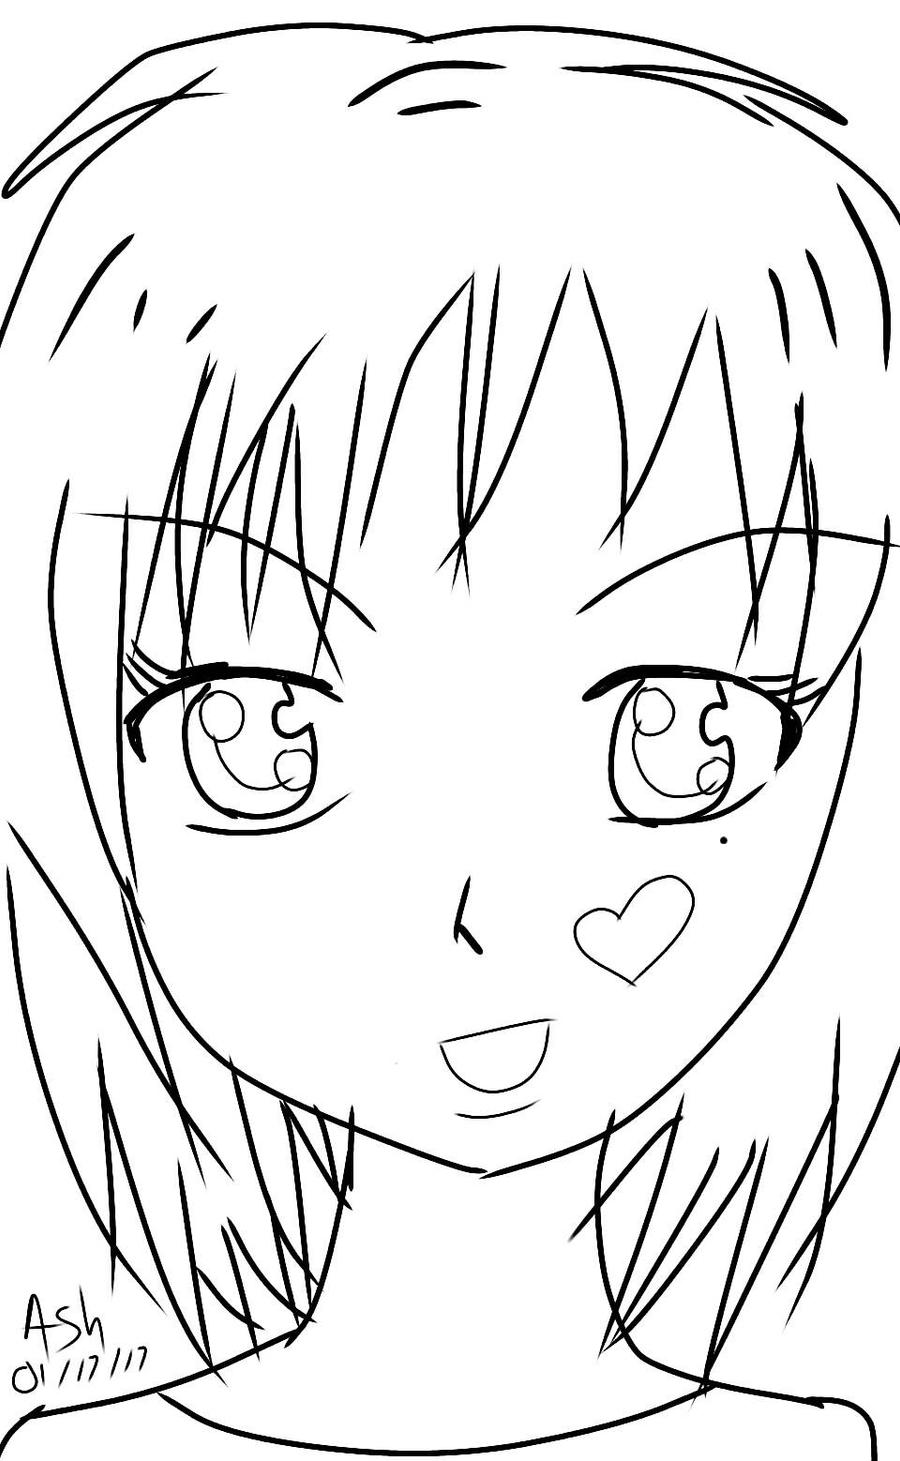 Anime Girl coloring page part 20 by Rosepetaldream on DeviantArt